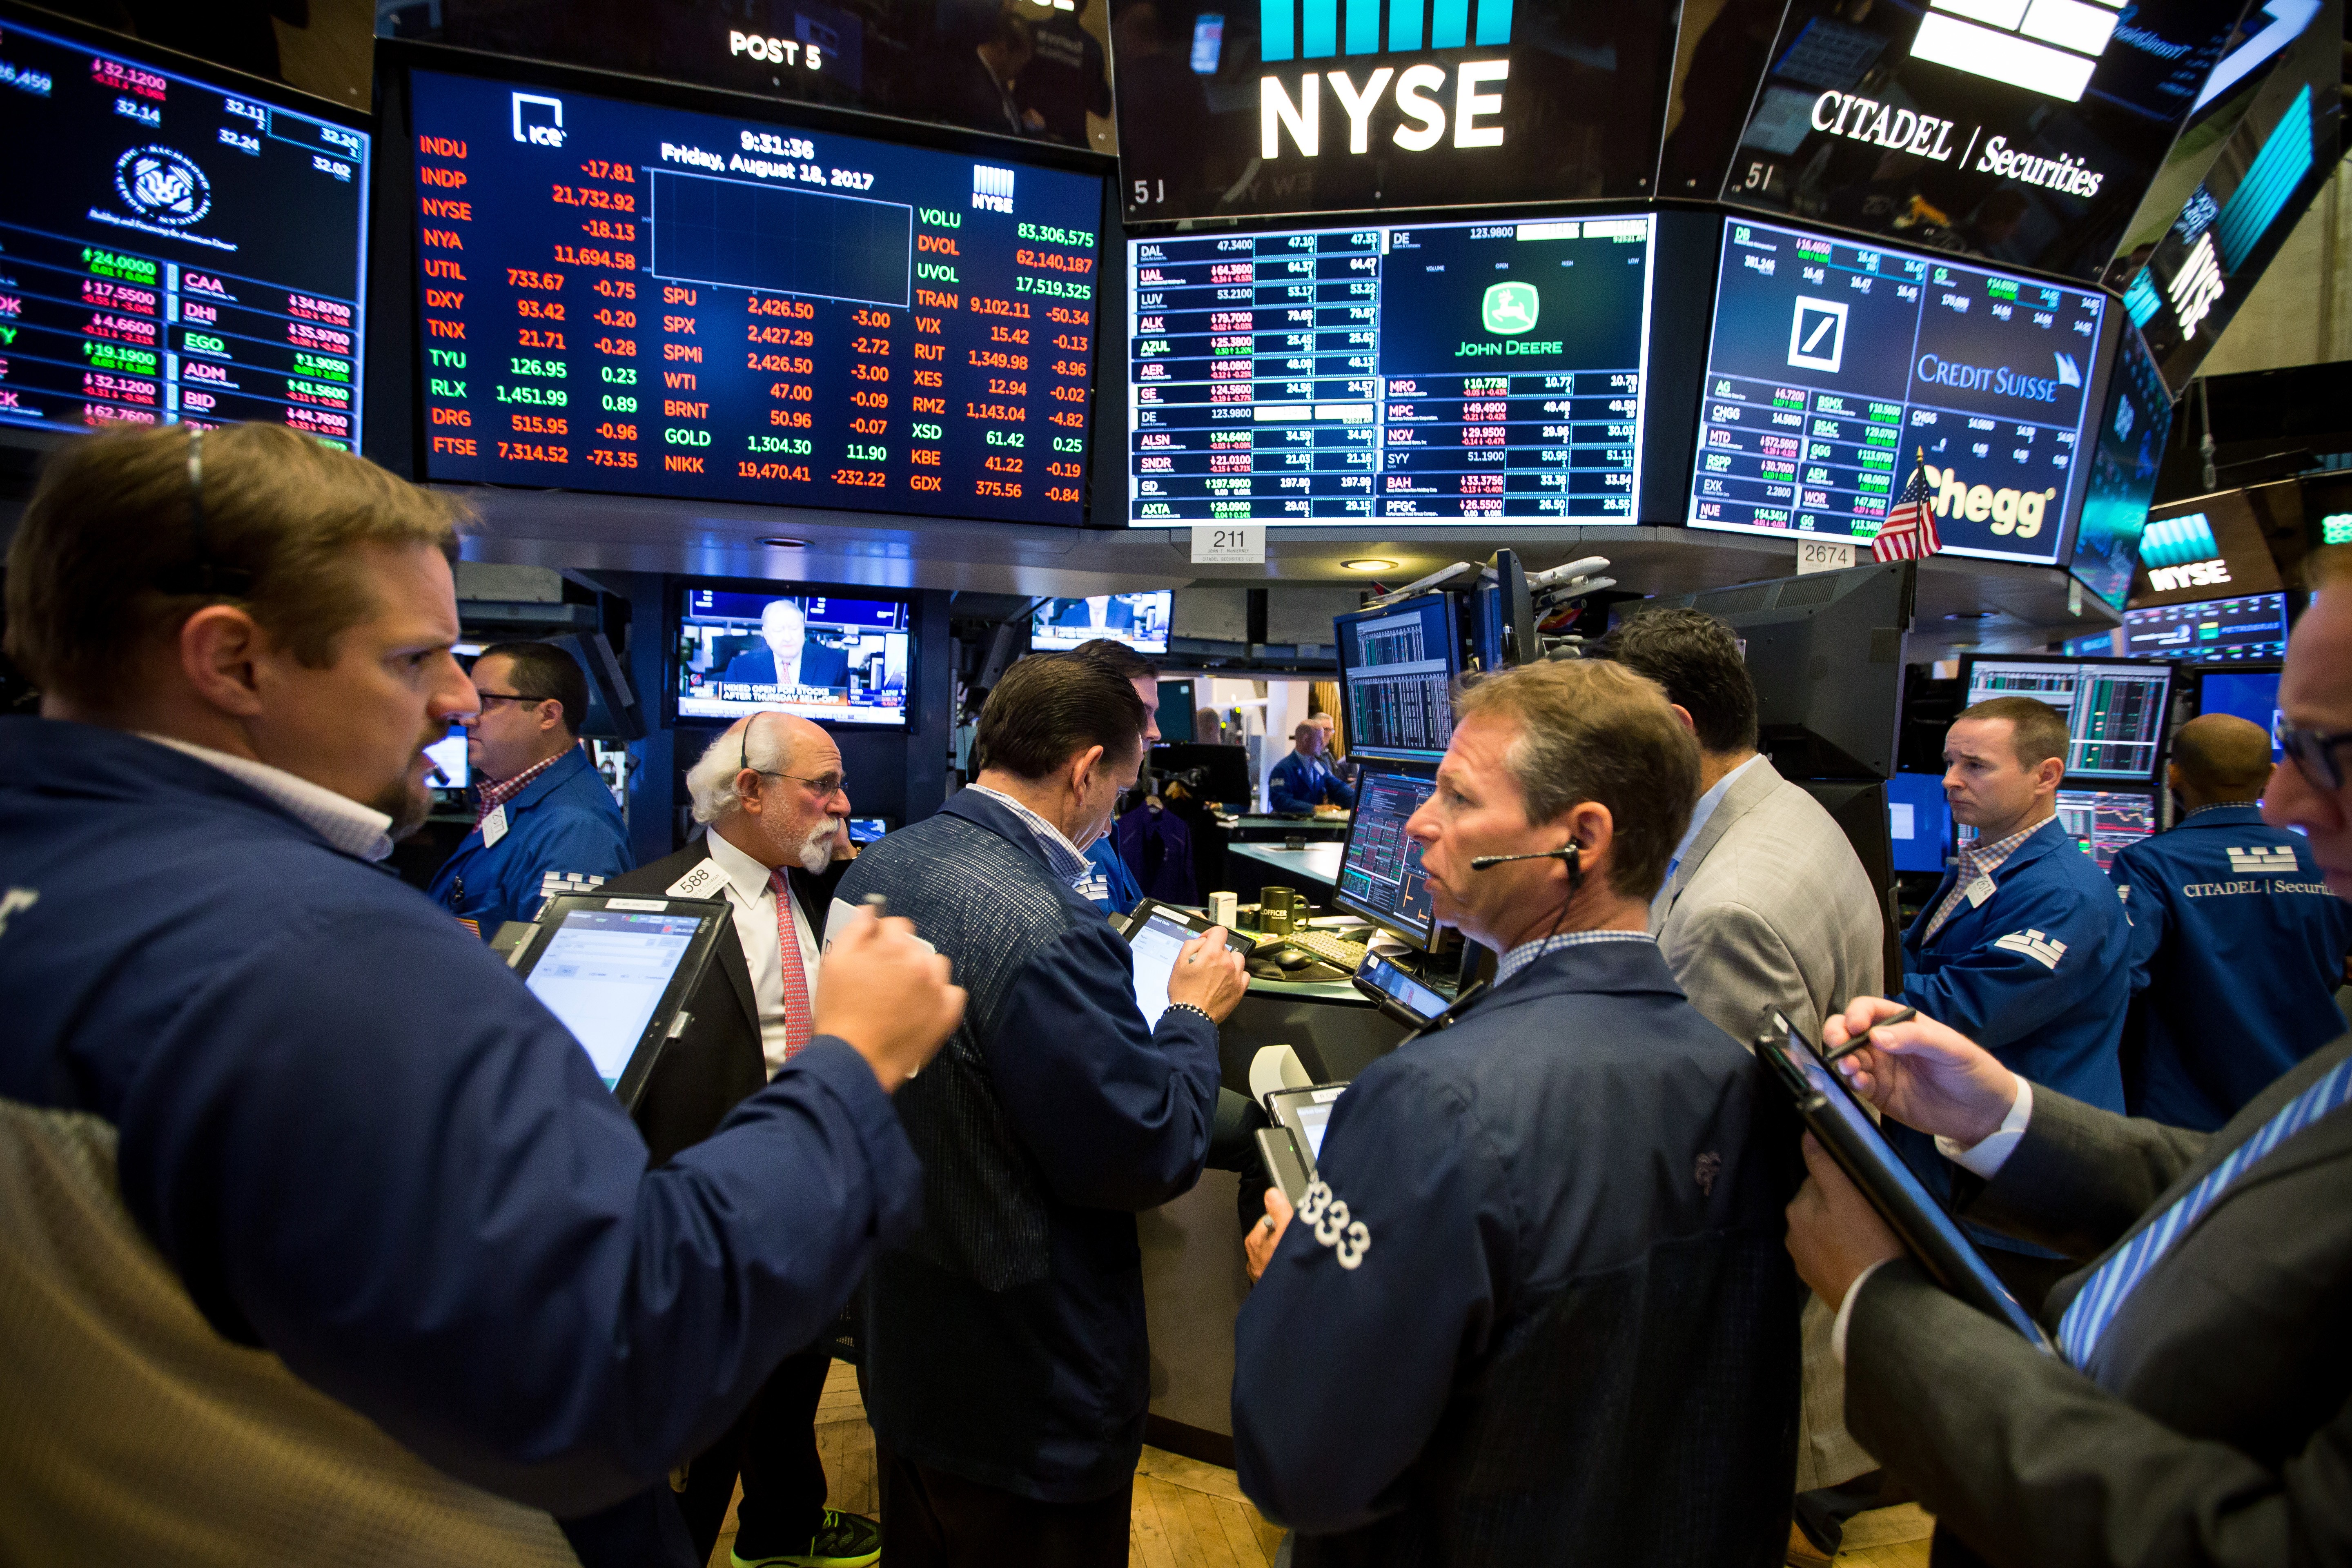 Traders work on the floor of the New York Stock Exchange as share prices weakened because of worries about President Donald Trump’s agenda and the terrorist attacks in Spain. Photo: Bloomberg